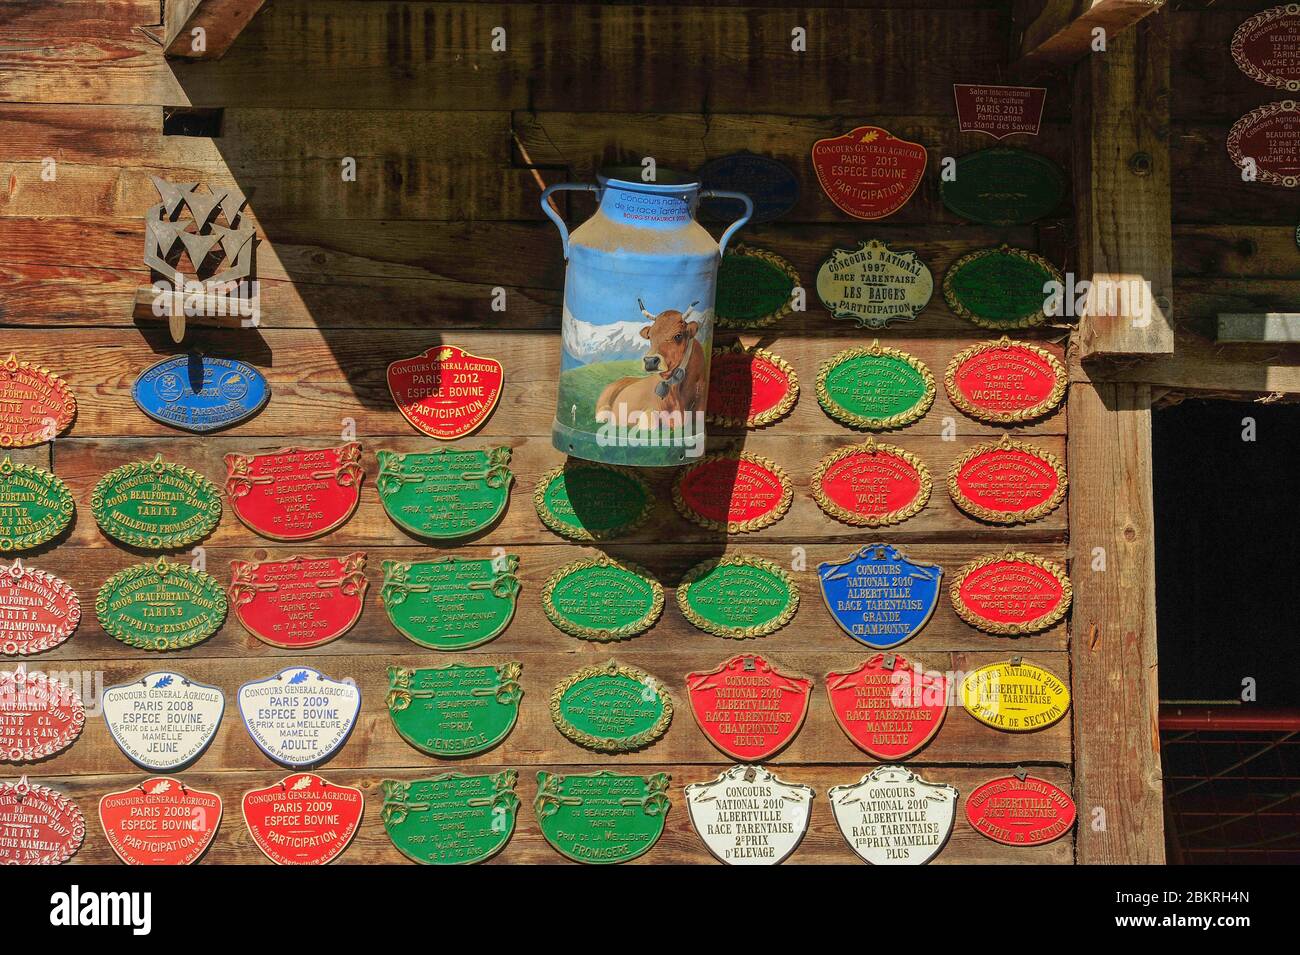 France, Savoie, Beaufortain, medals from various agricultural competitions Stock Photo